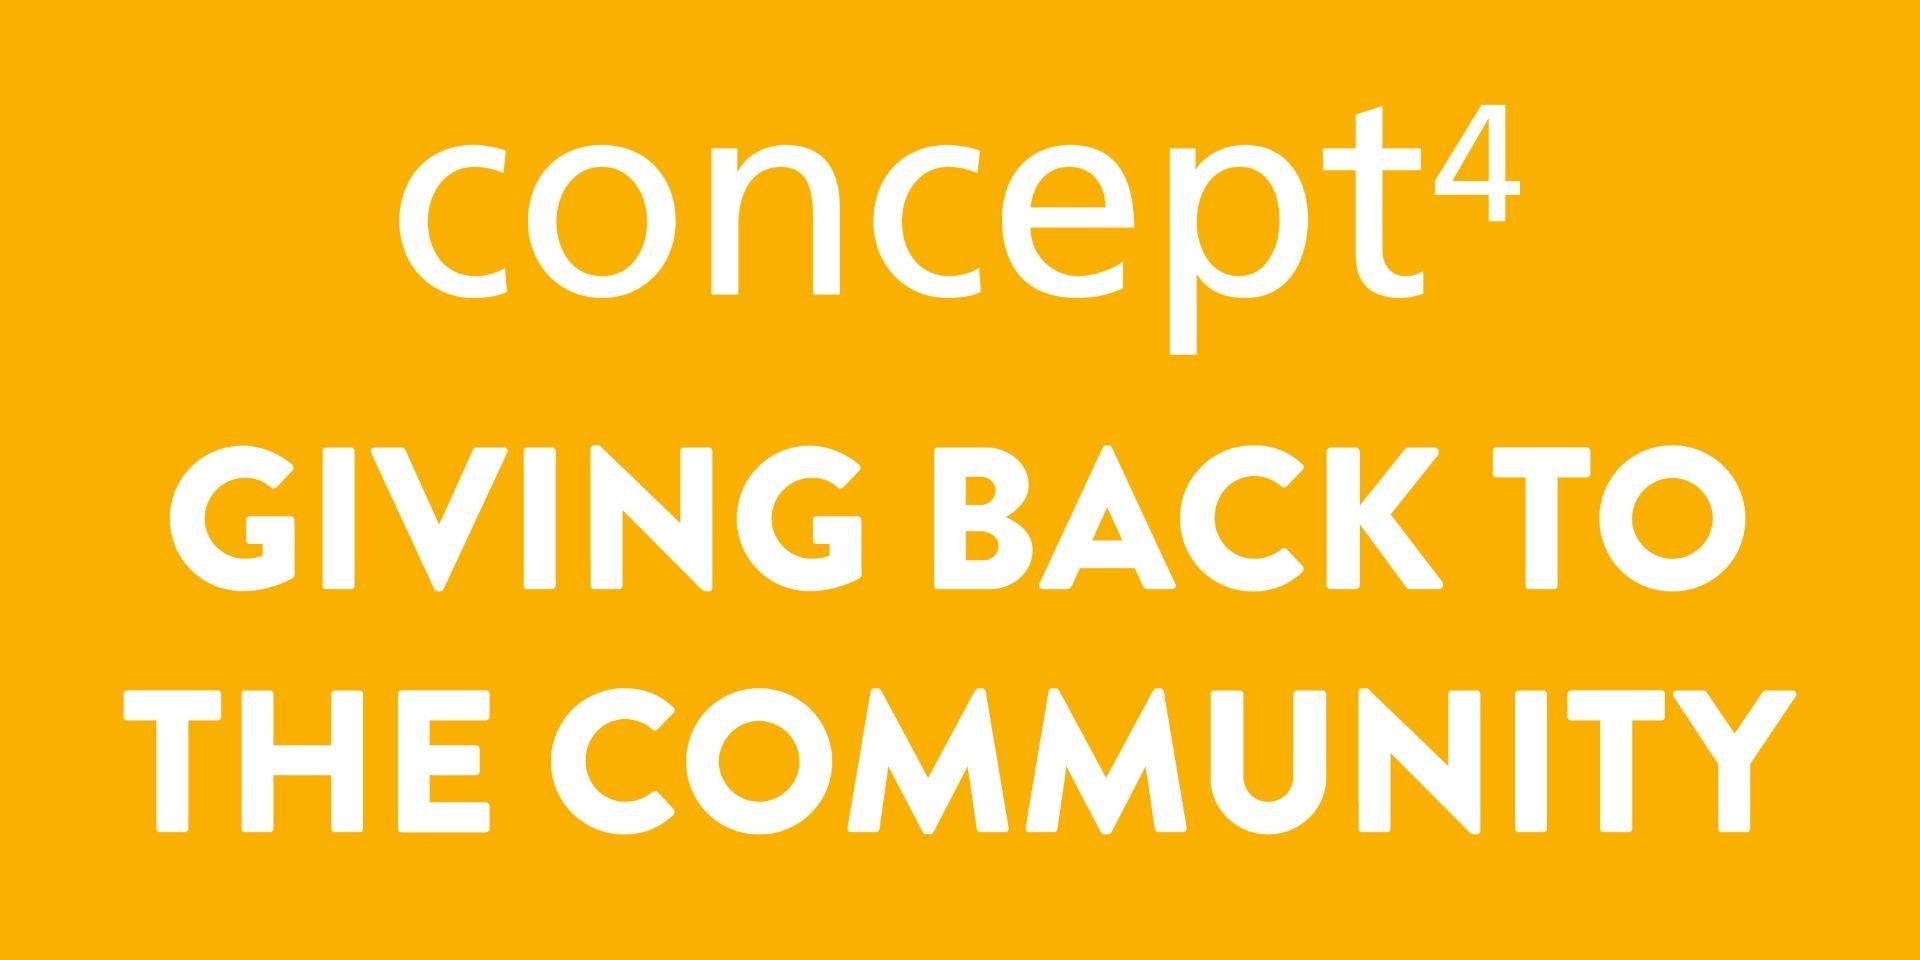 Concept4 giving back to the community